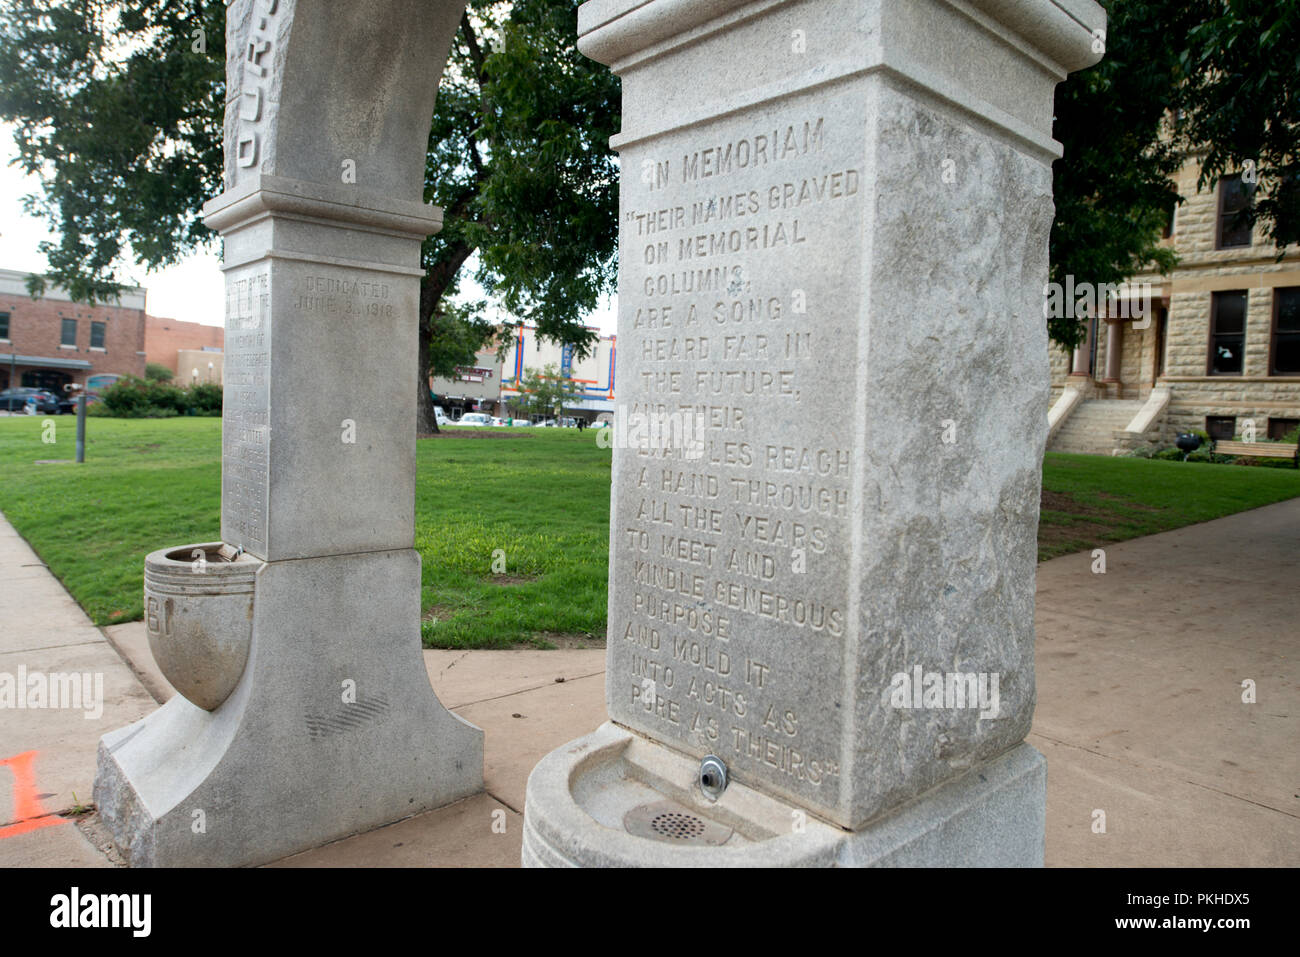 Confederate Soldiers Civil War Memorial statue in Denton, Texas. Statue is on list for activists who believe it represents racism. Stock Photo